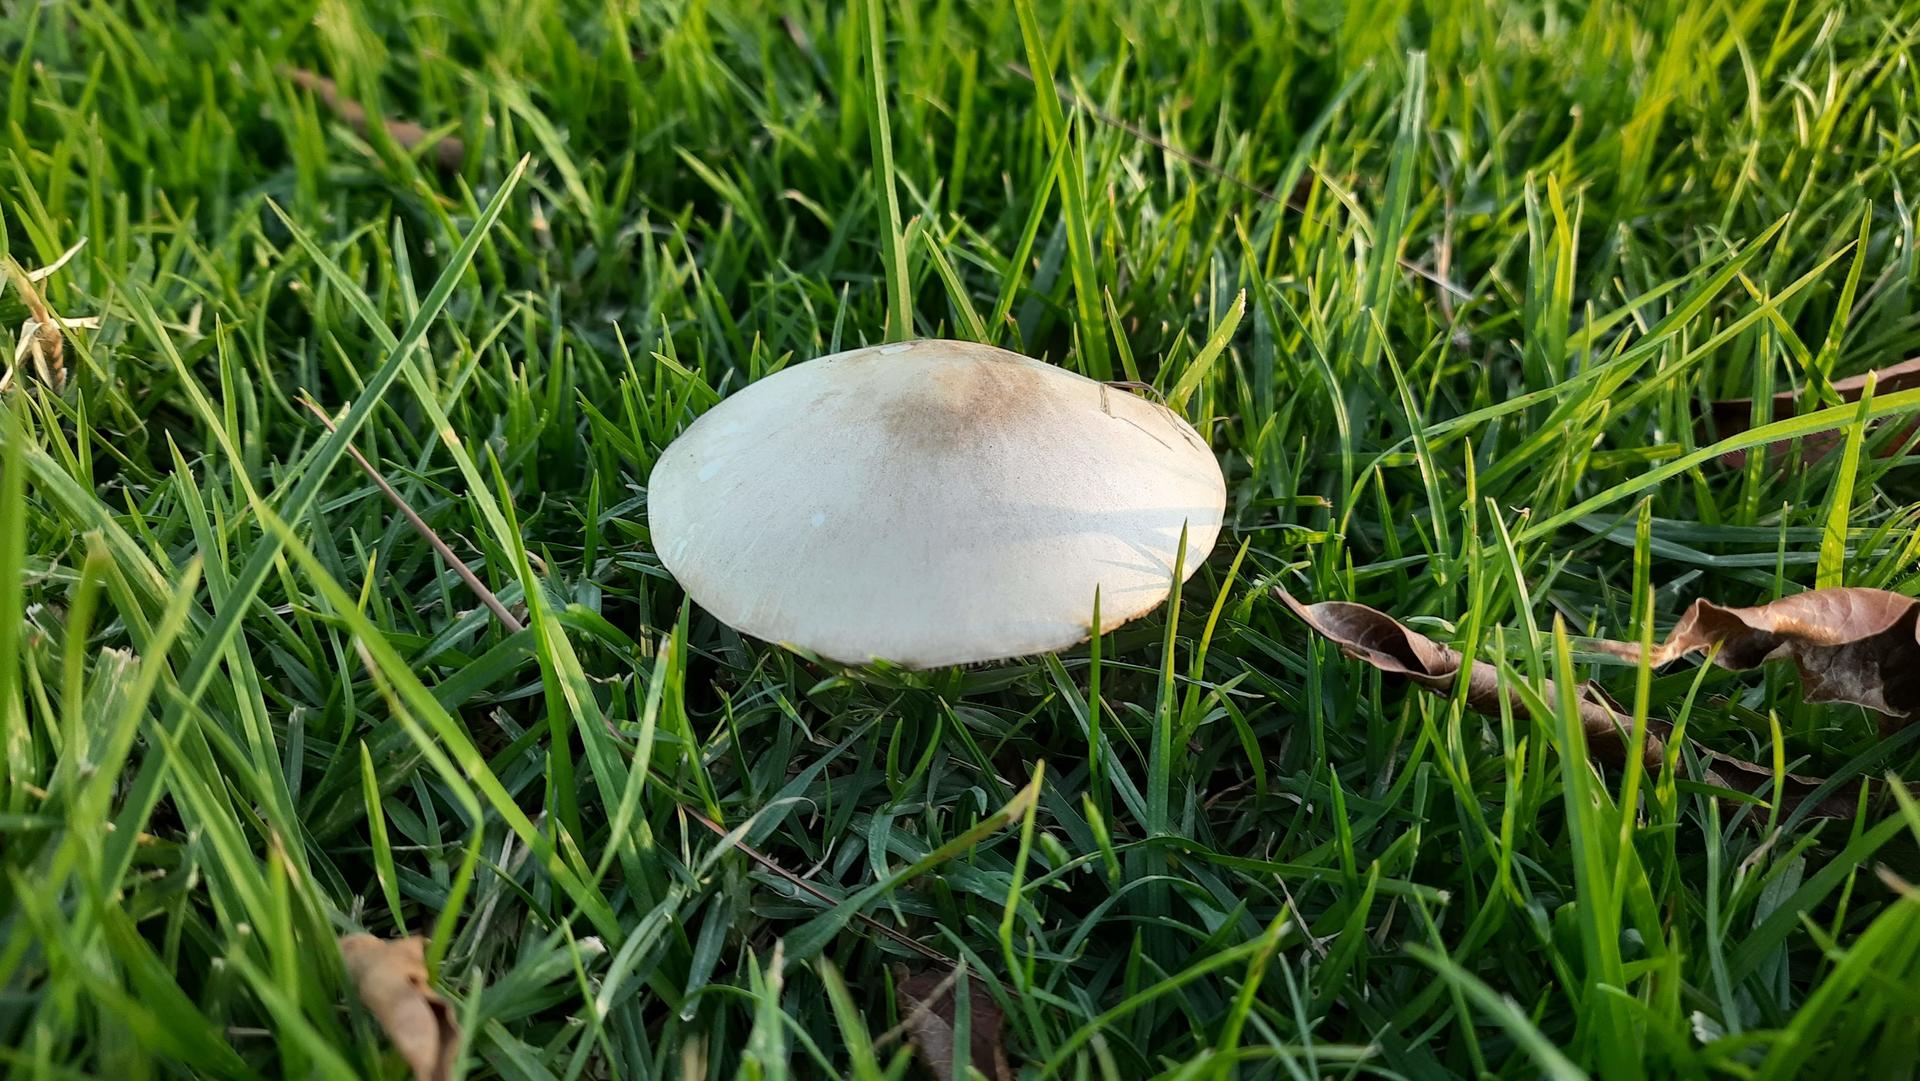 Photograph of a white mushroom against a background of grass